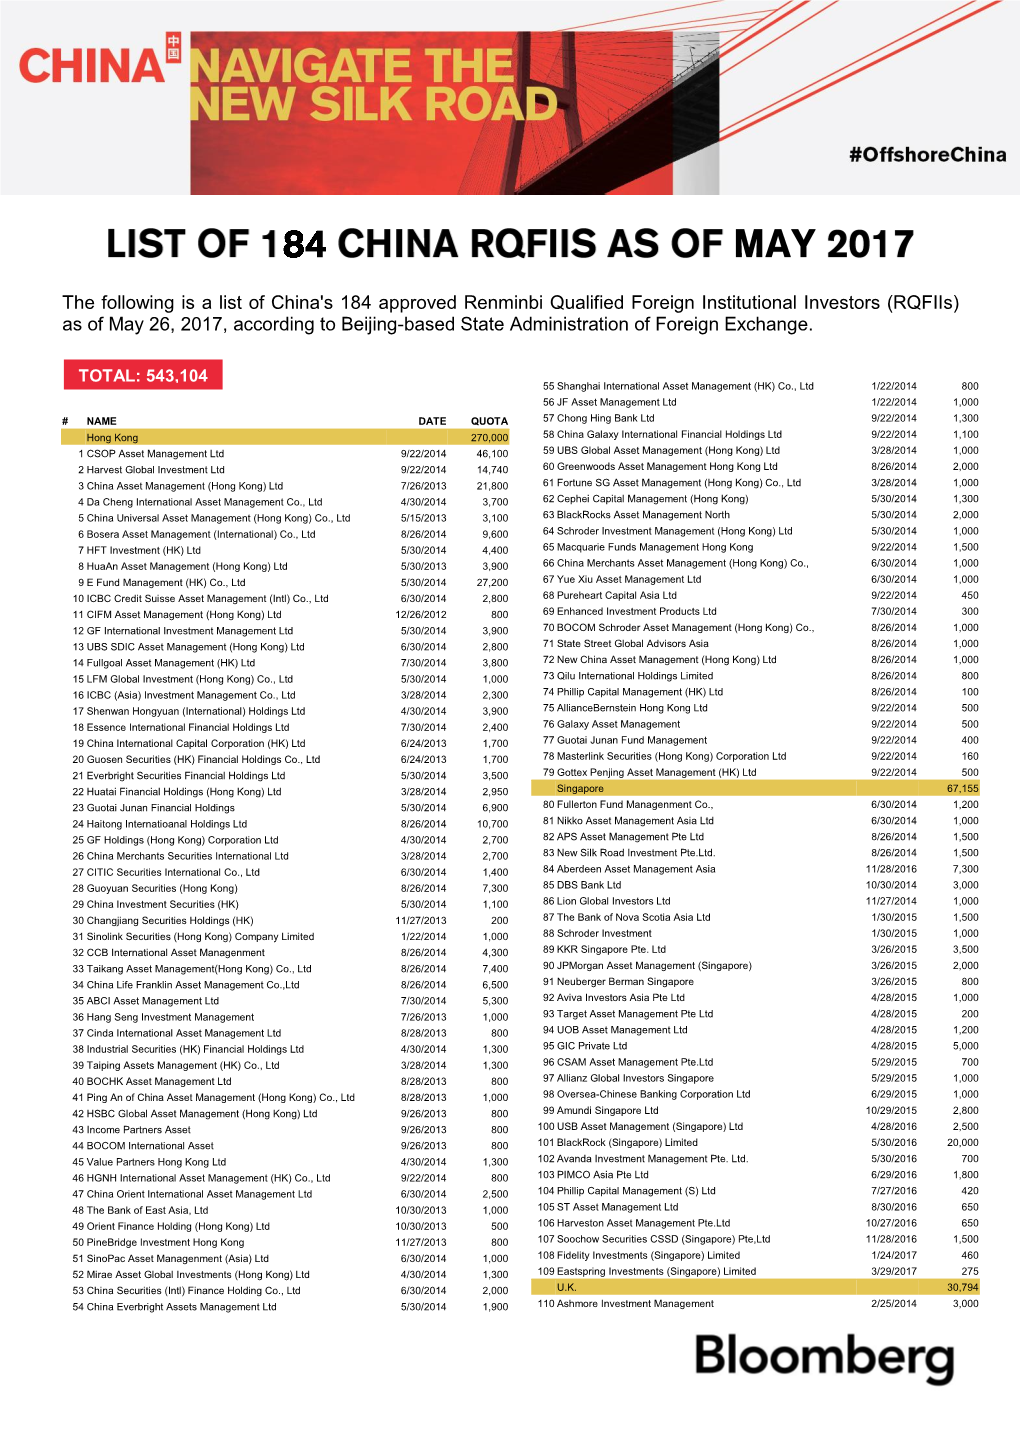 The Following Is a List of China's 184 Approved Renminbi Qualified